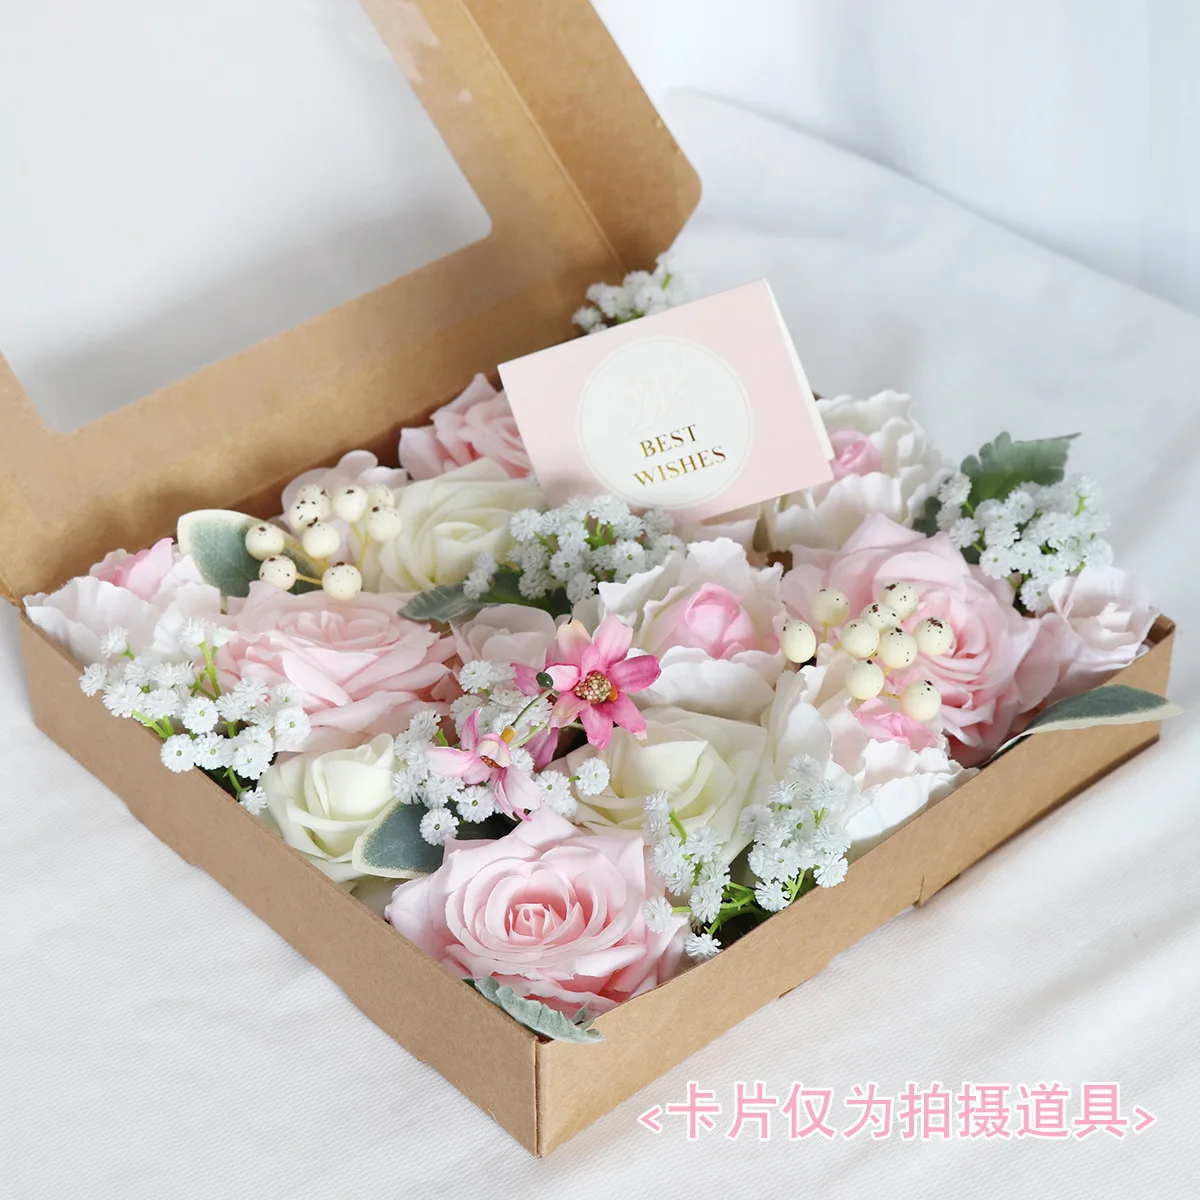 

Refinement Simulation Flower Box Decoration Wedding Festival Party Artificial Flower Gifts Box Scene Layout Ornaments Supplies